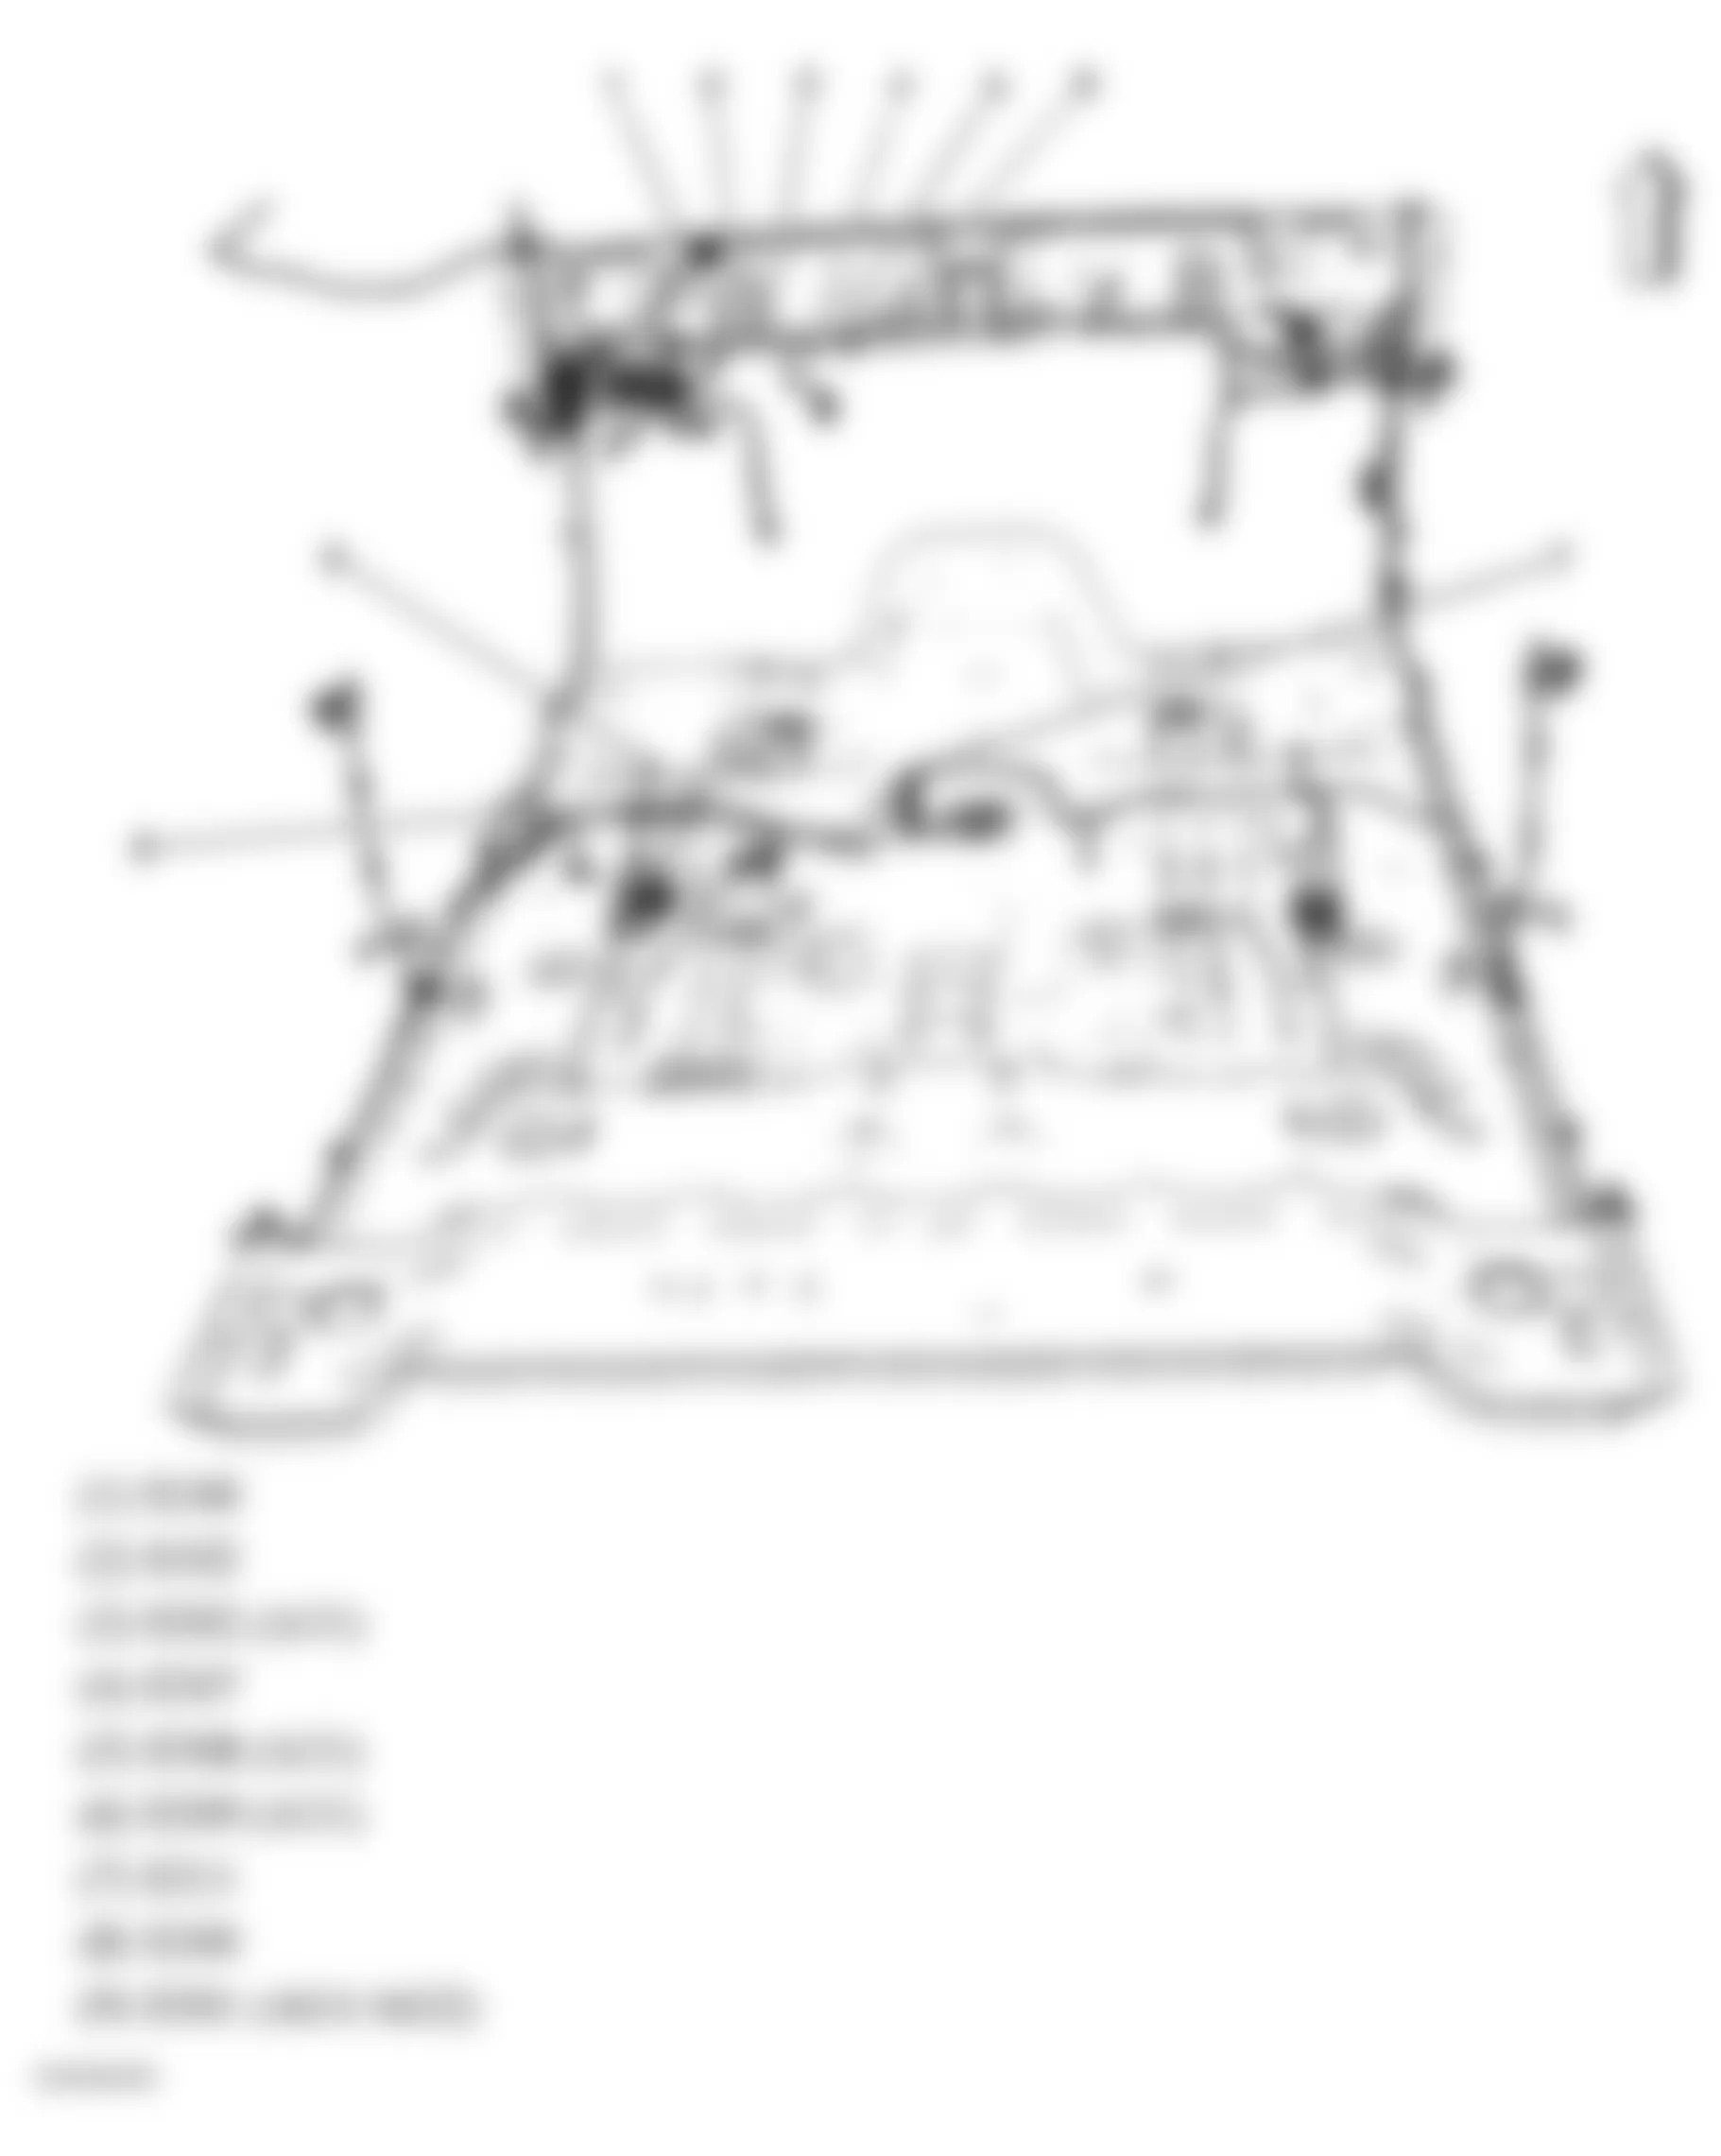 Chevrolet Colorado 2004 - Component Locations -  Body Harness Routing